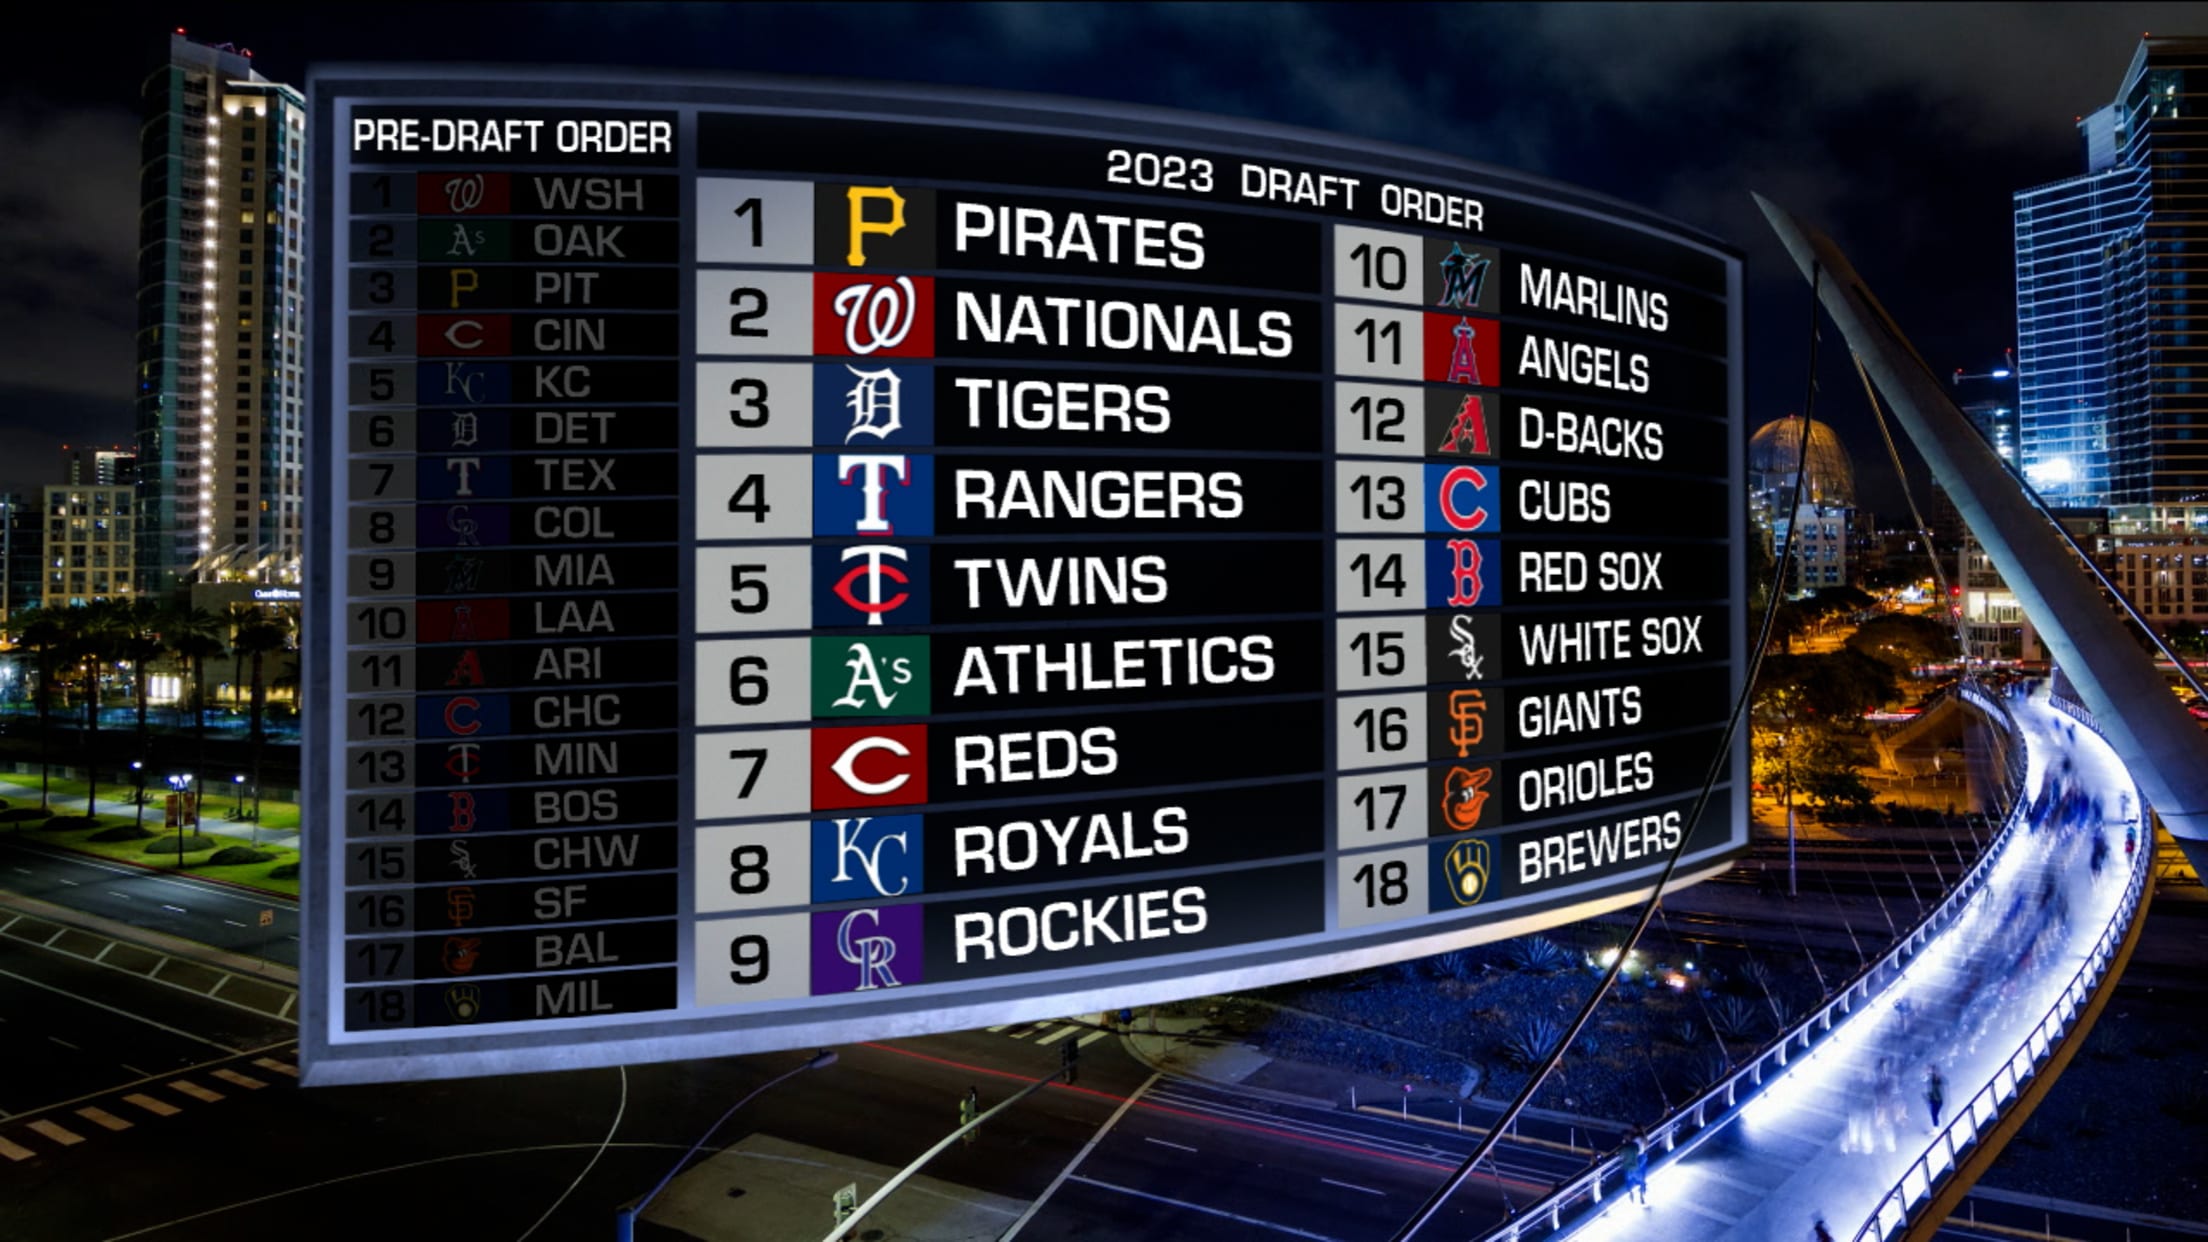 Pirates win first Draft Lottery